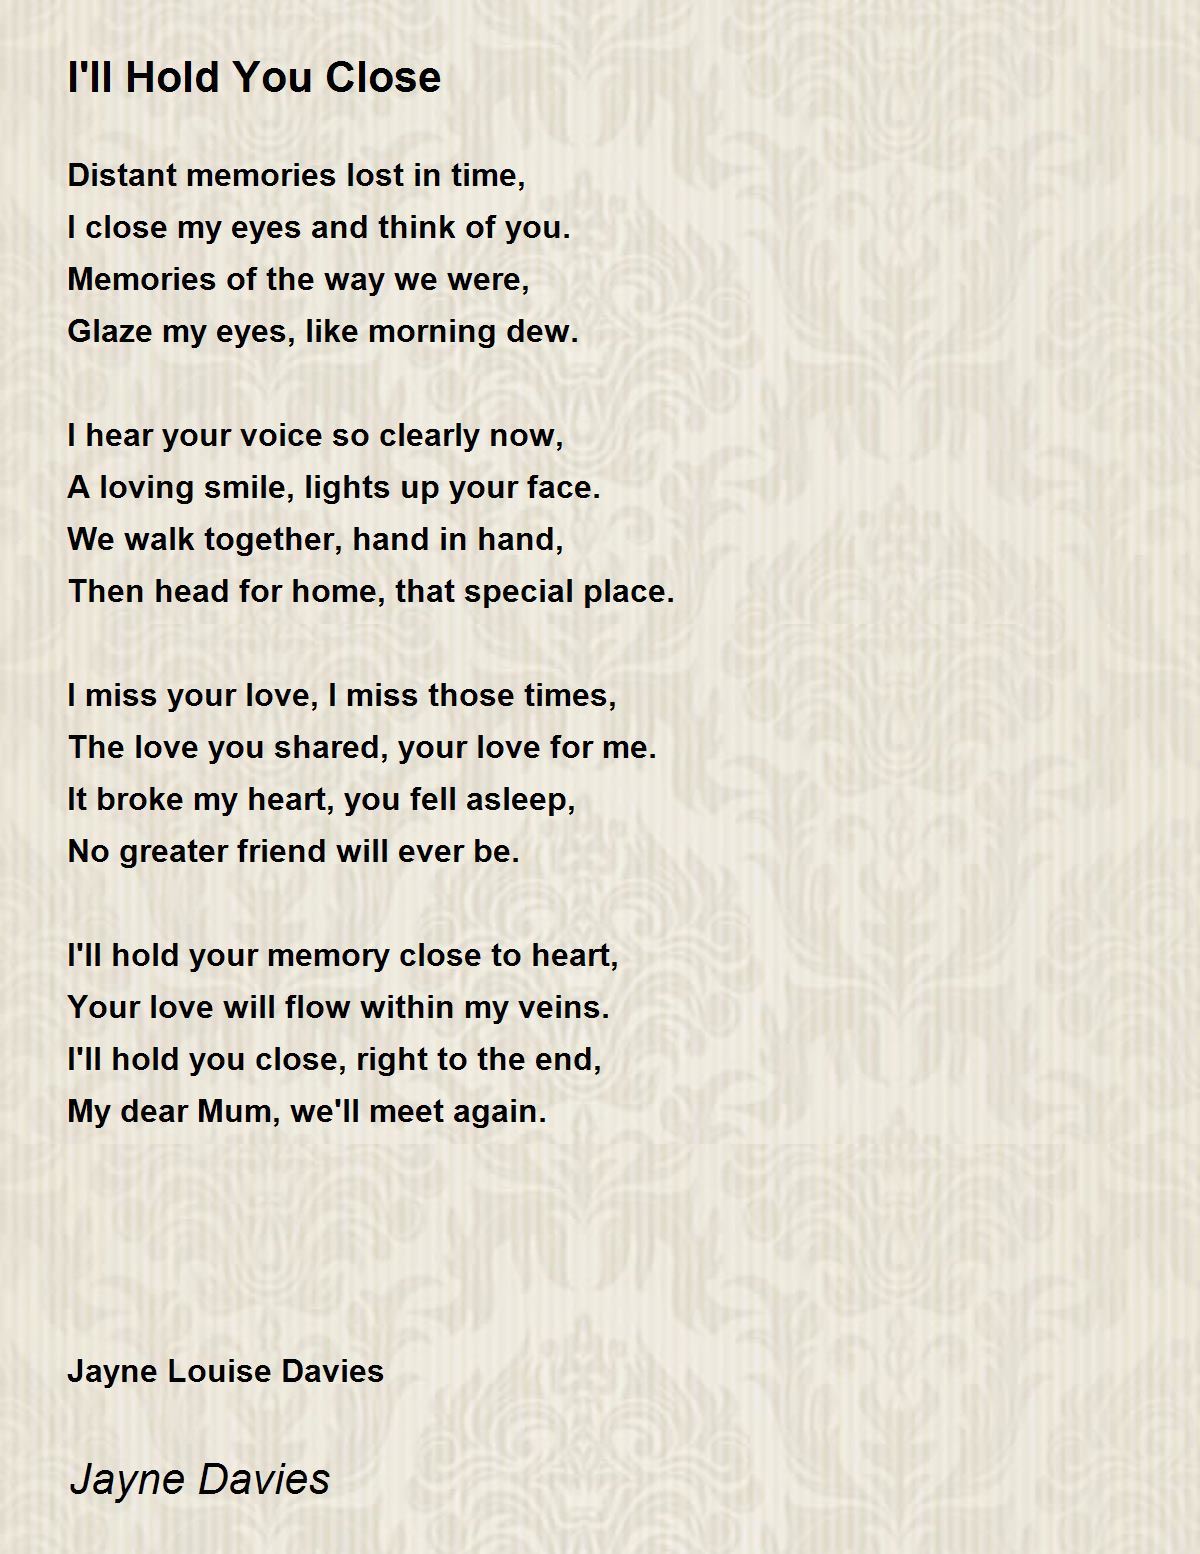 I'll Hold You Close - I'll Hold You Close Poem by Jayne Louise Davies